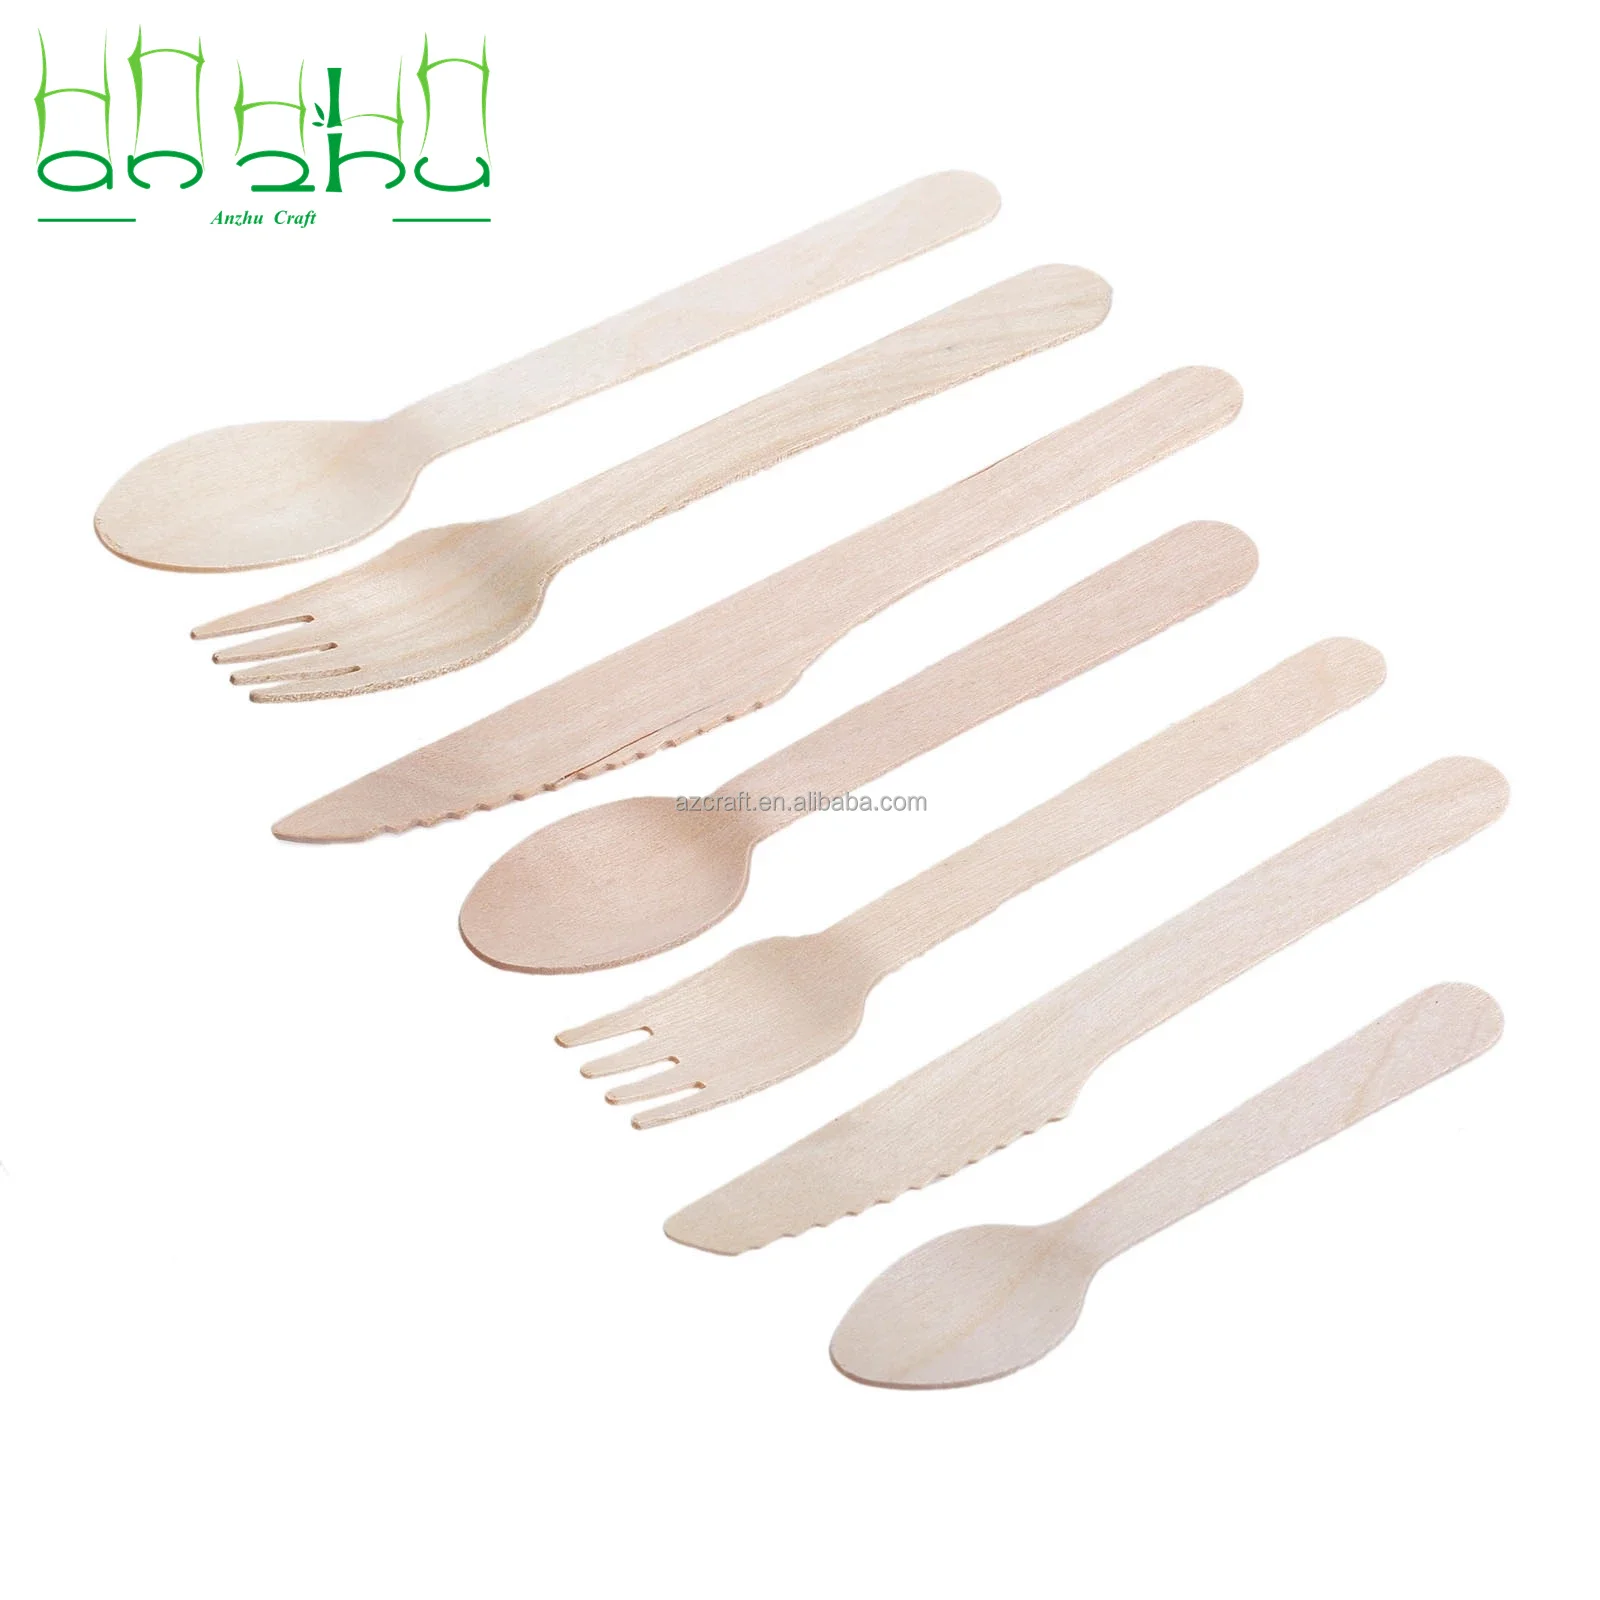 

Anzhu 100% Compostable Wooden Cutlery Set Disposable Utensils for Party Camping More Biodegradable Packaged